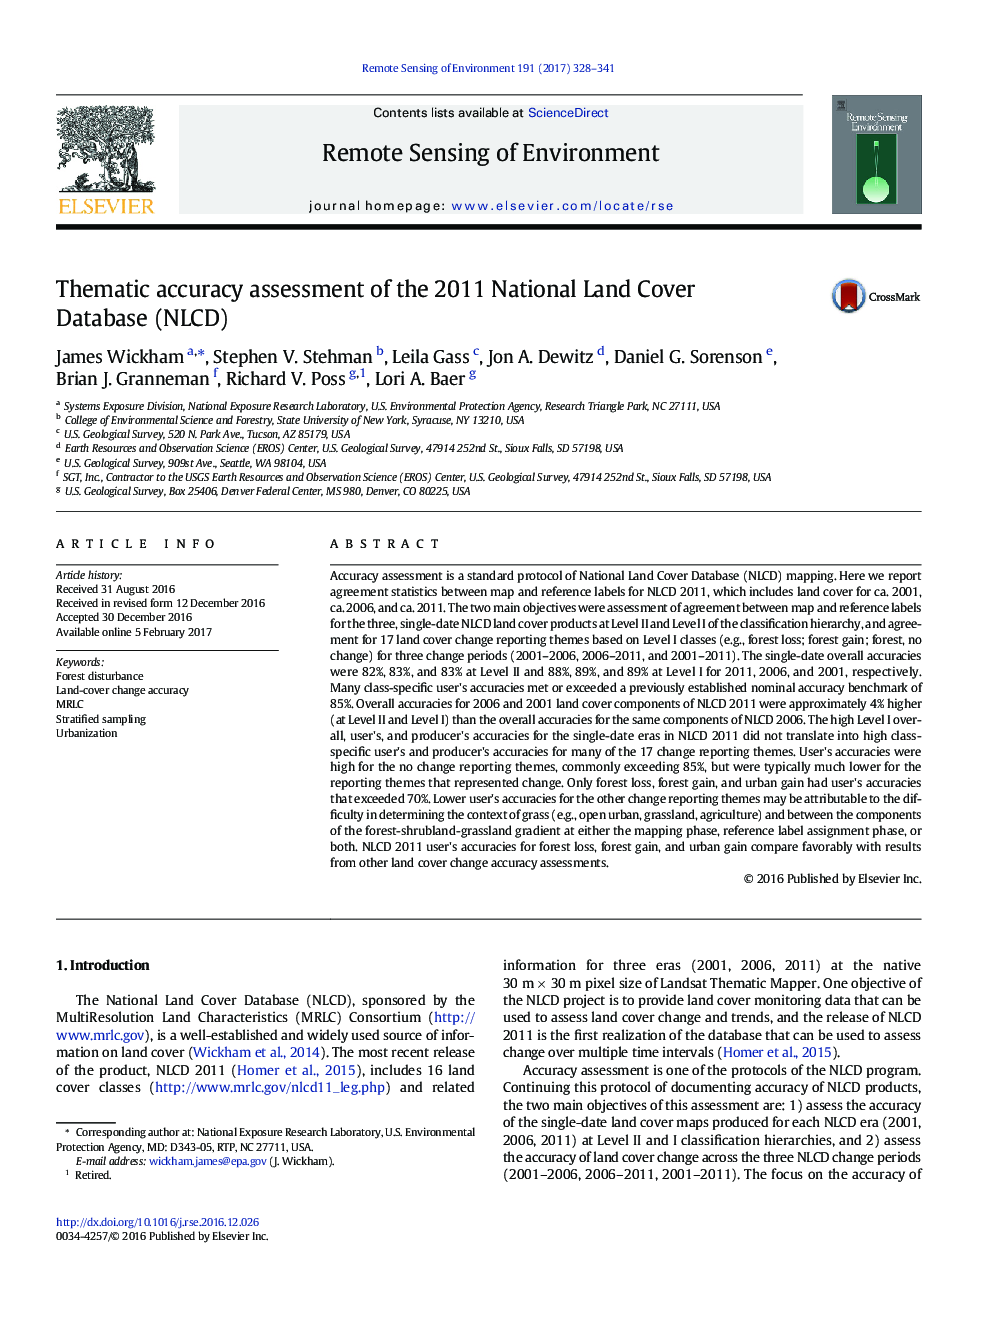 Thematic accuracy assessment of the 2011 National Land Cover Database (NLCD)